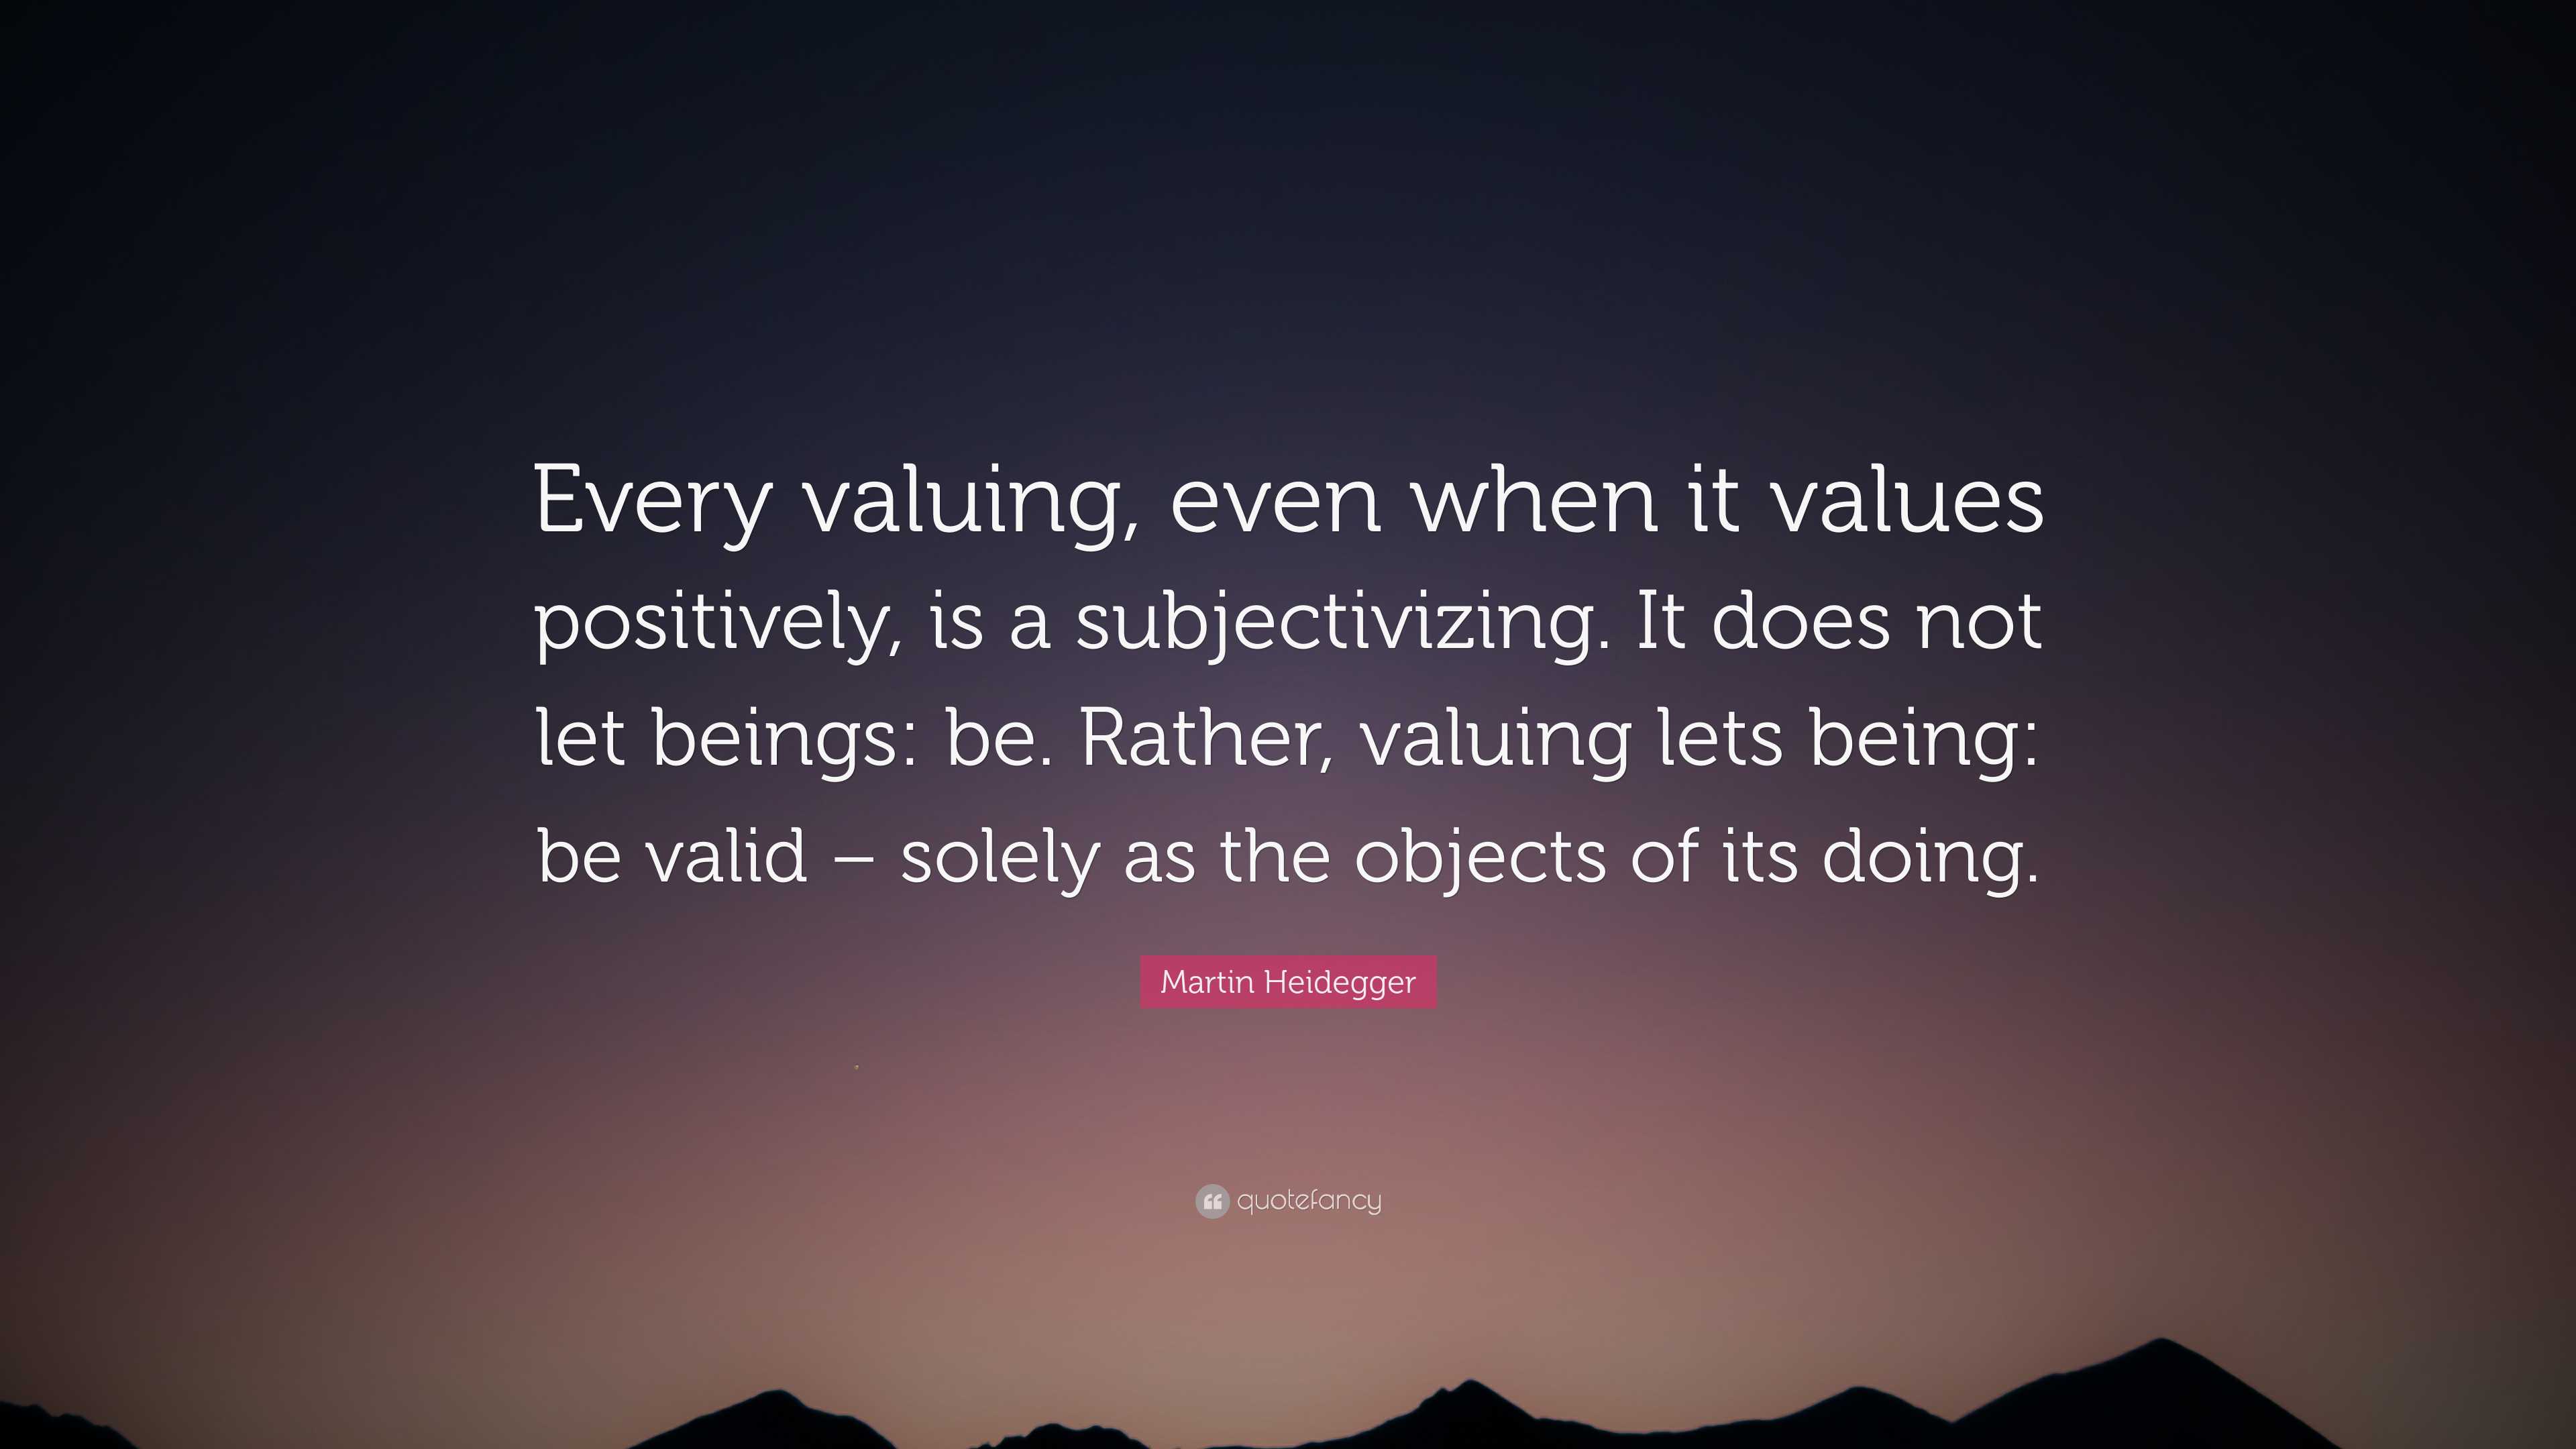 Martin Heidegger Quote: “Every valuing, even when it values positively ...